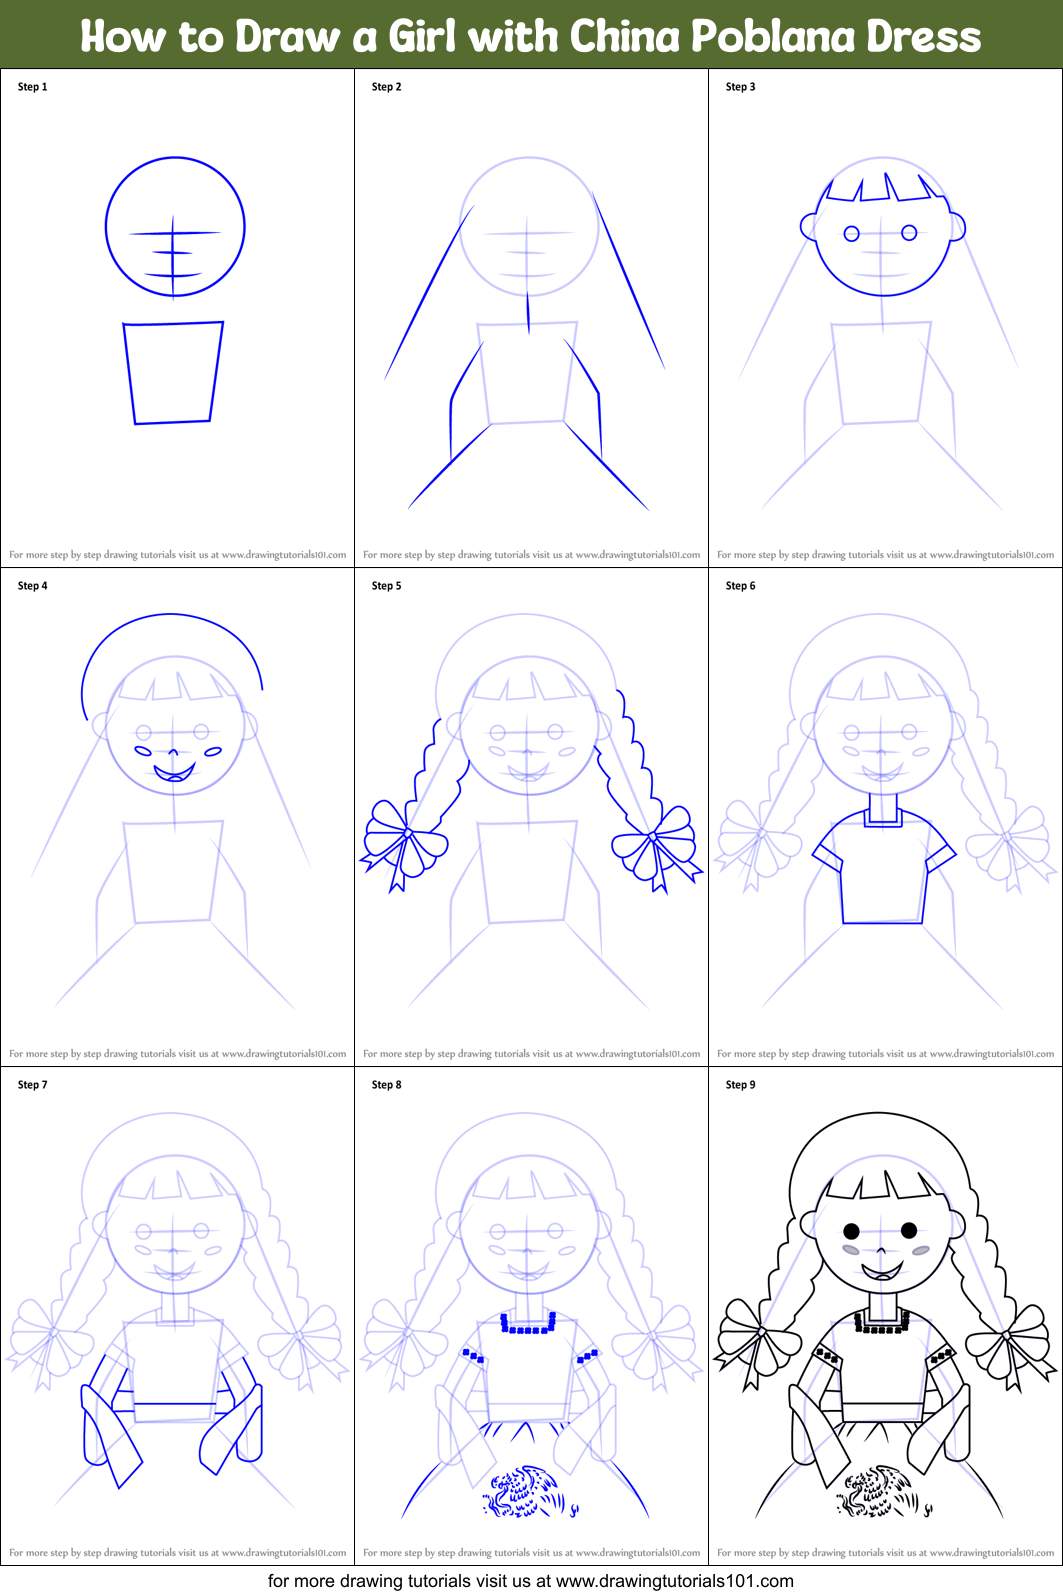 how to draw a girl with a dress step by step